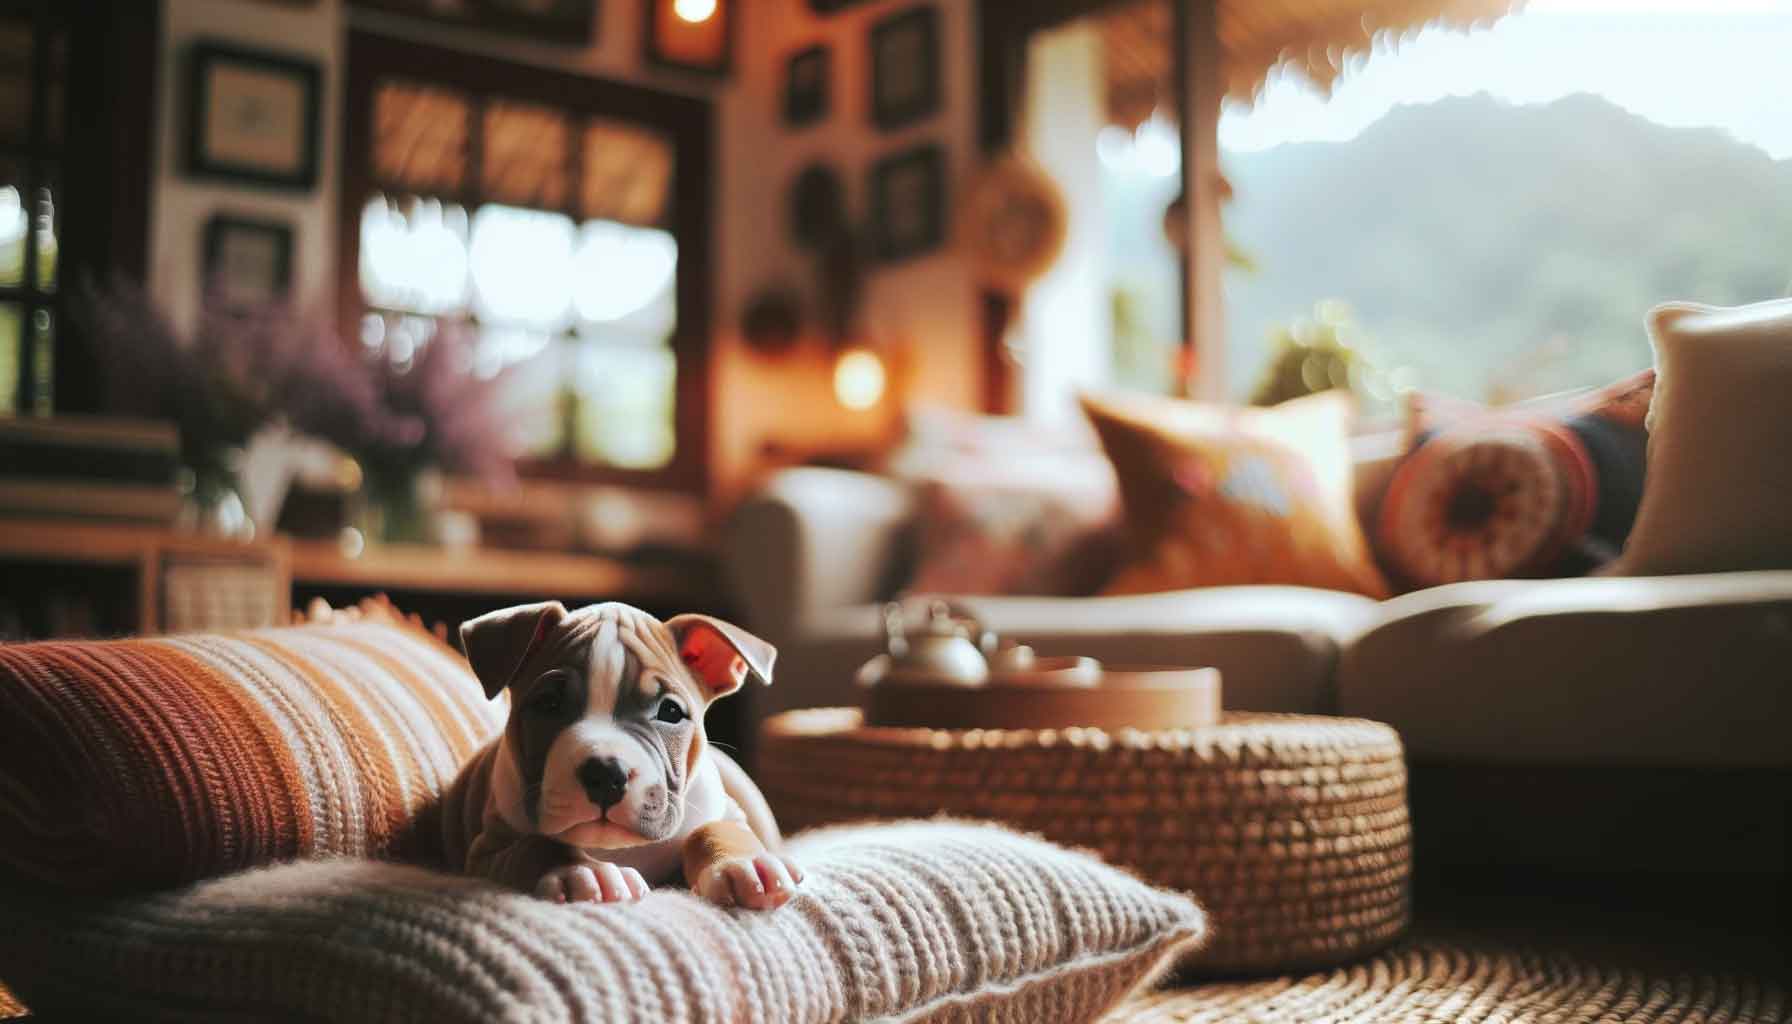 A relaxed micro bully puppy lounging on a plush cushion, set against a cozy domestic backdrop, with sunlight creating a warm and inviting atmosphere.